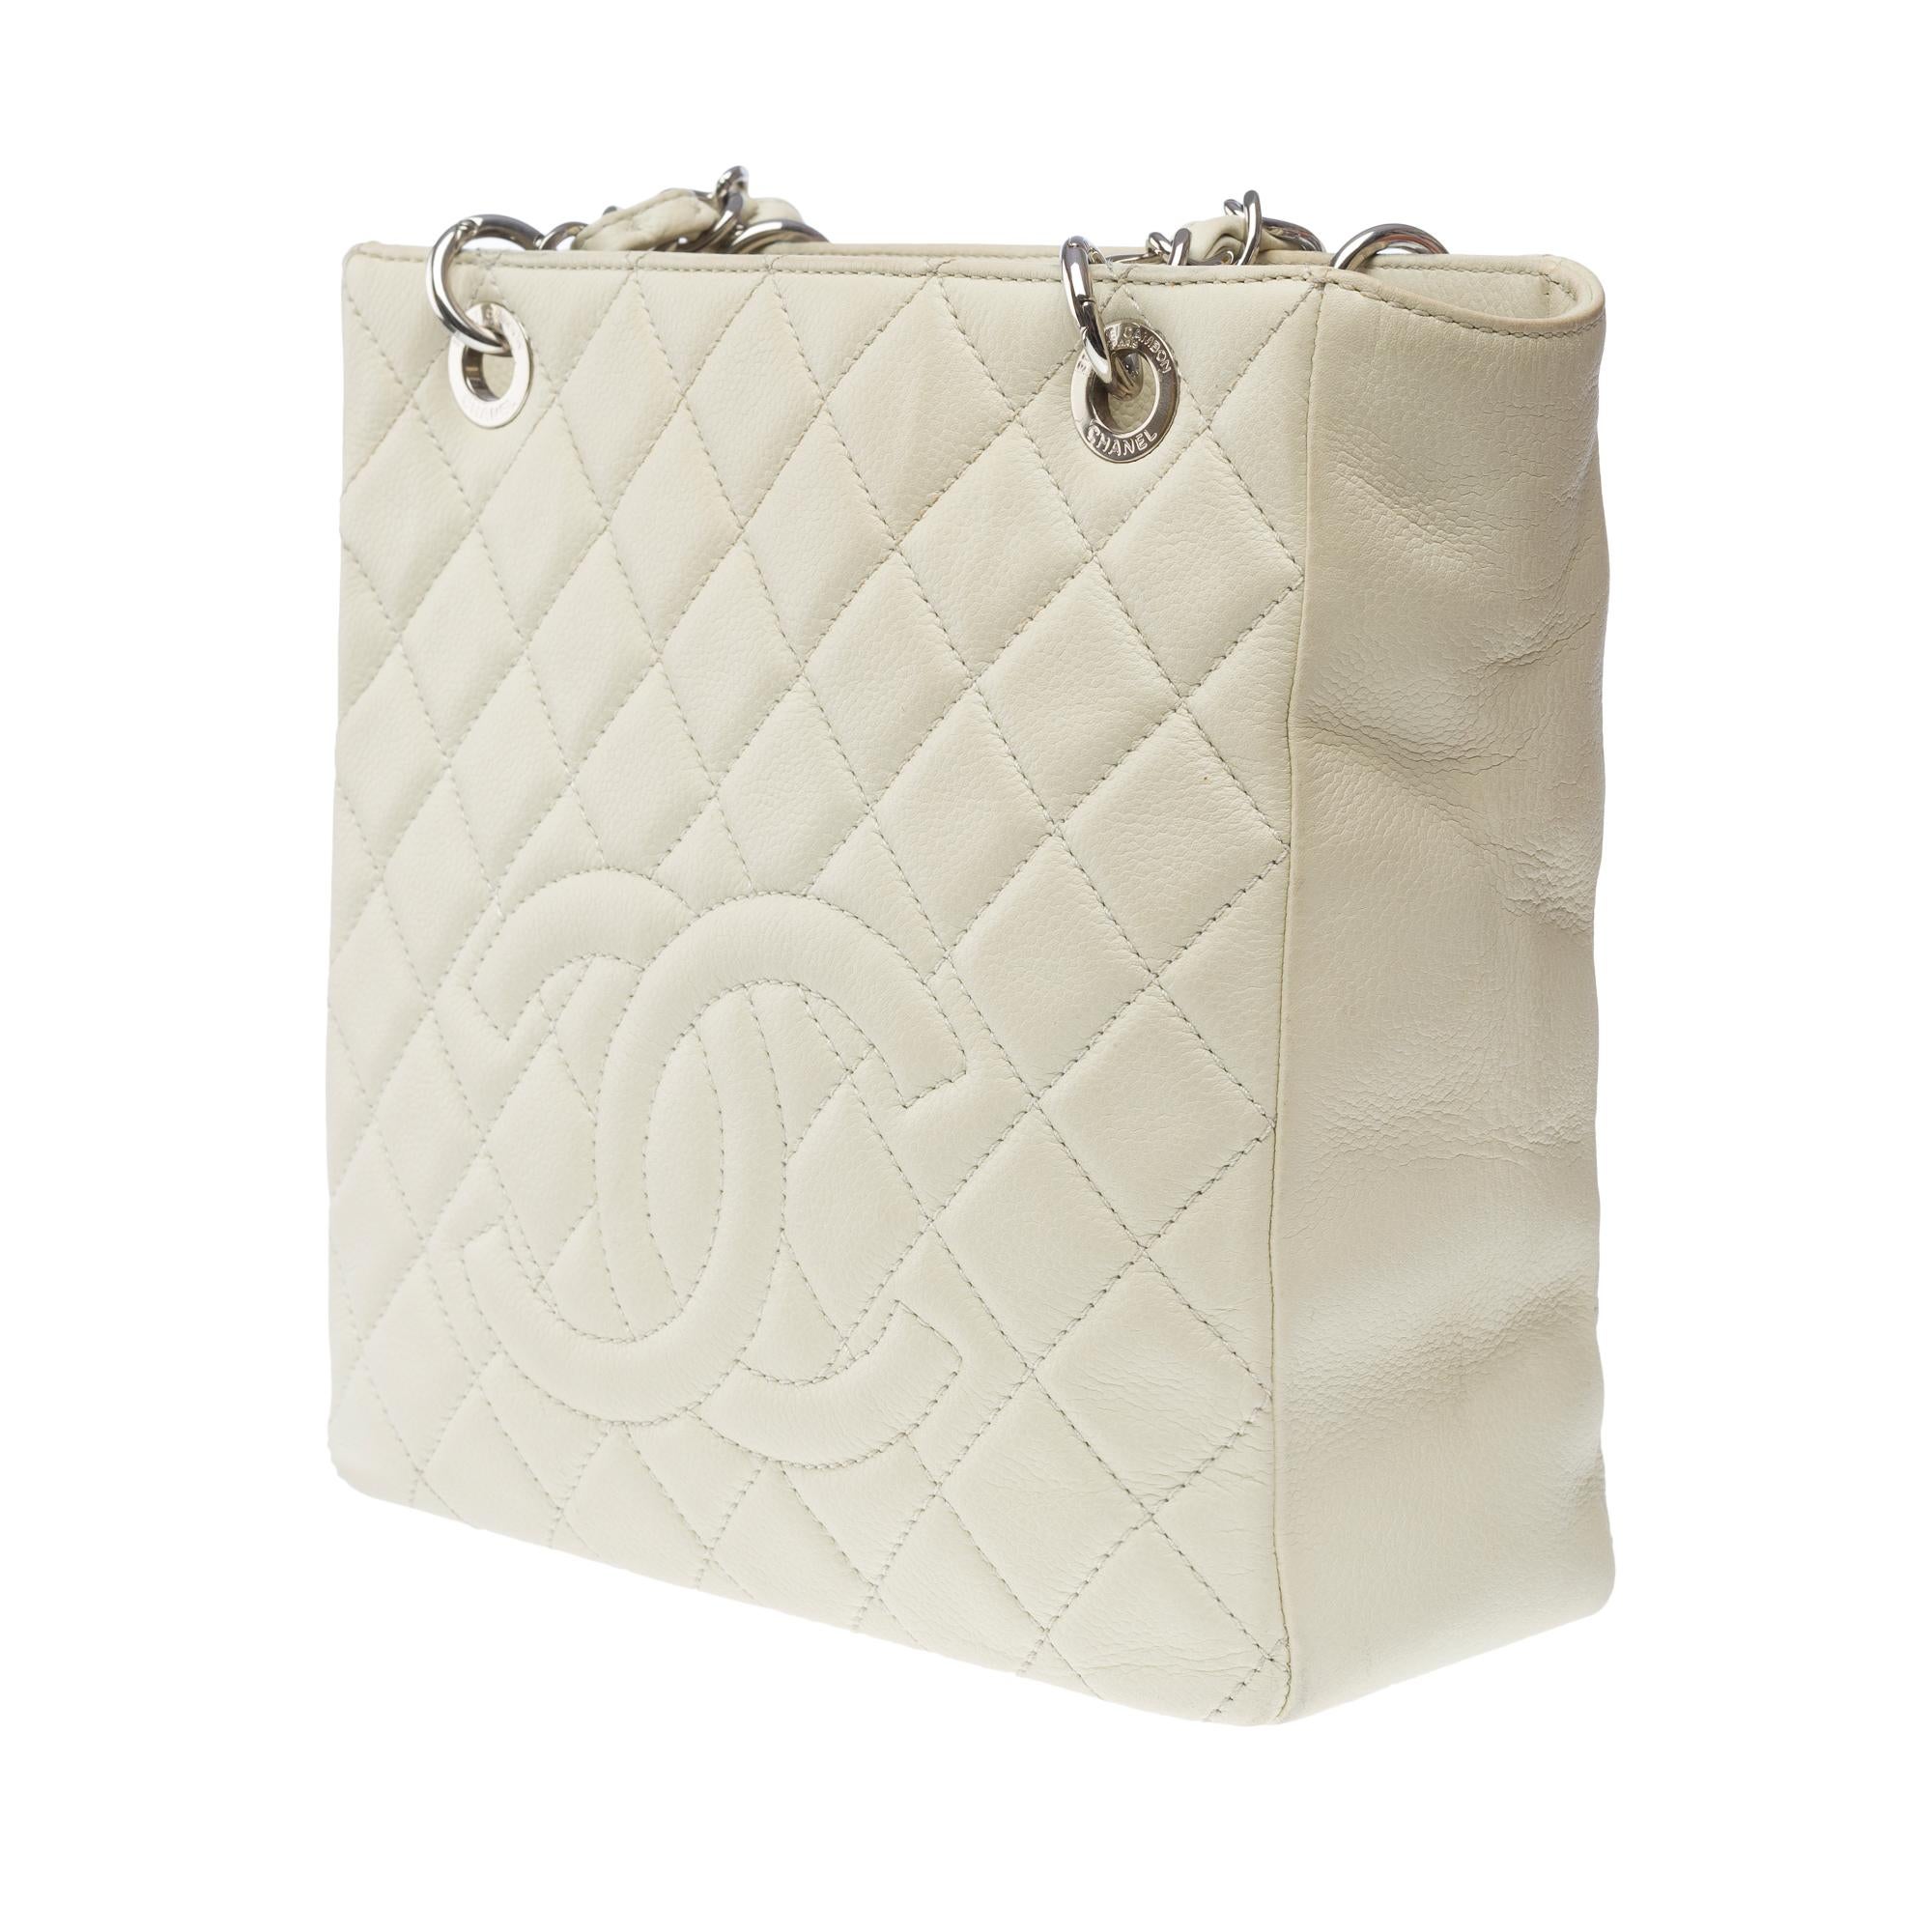  Chanel Petit Shopping Tote bag (PST) in Off-White Caviar quilted leather, SHW For Sale 1